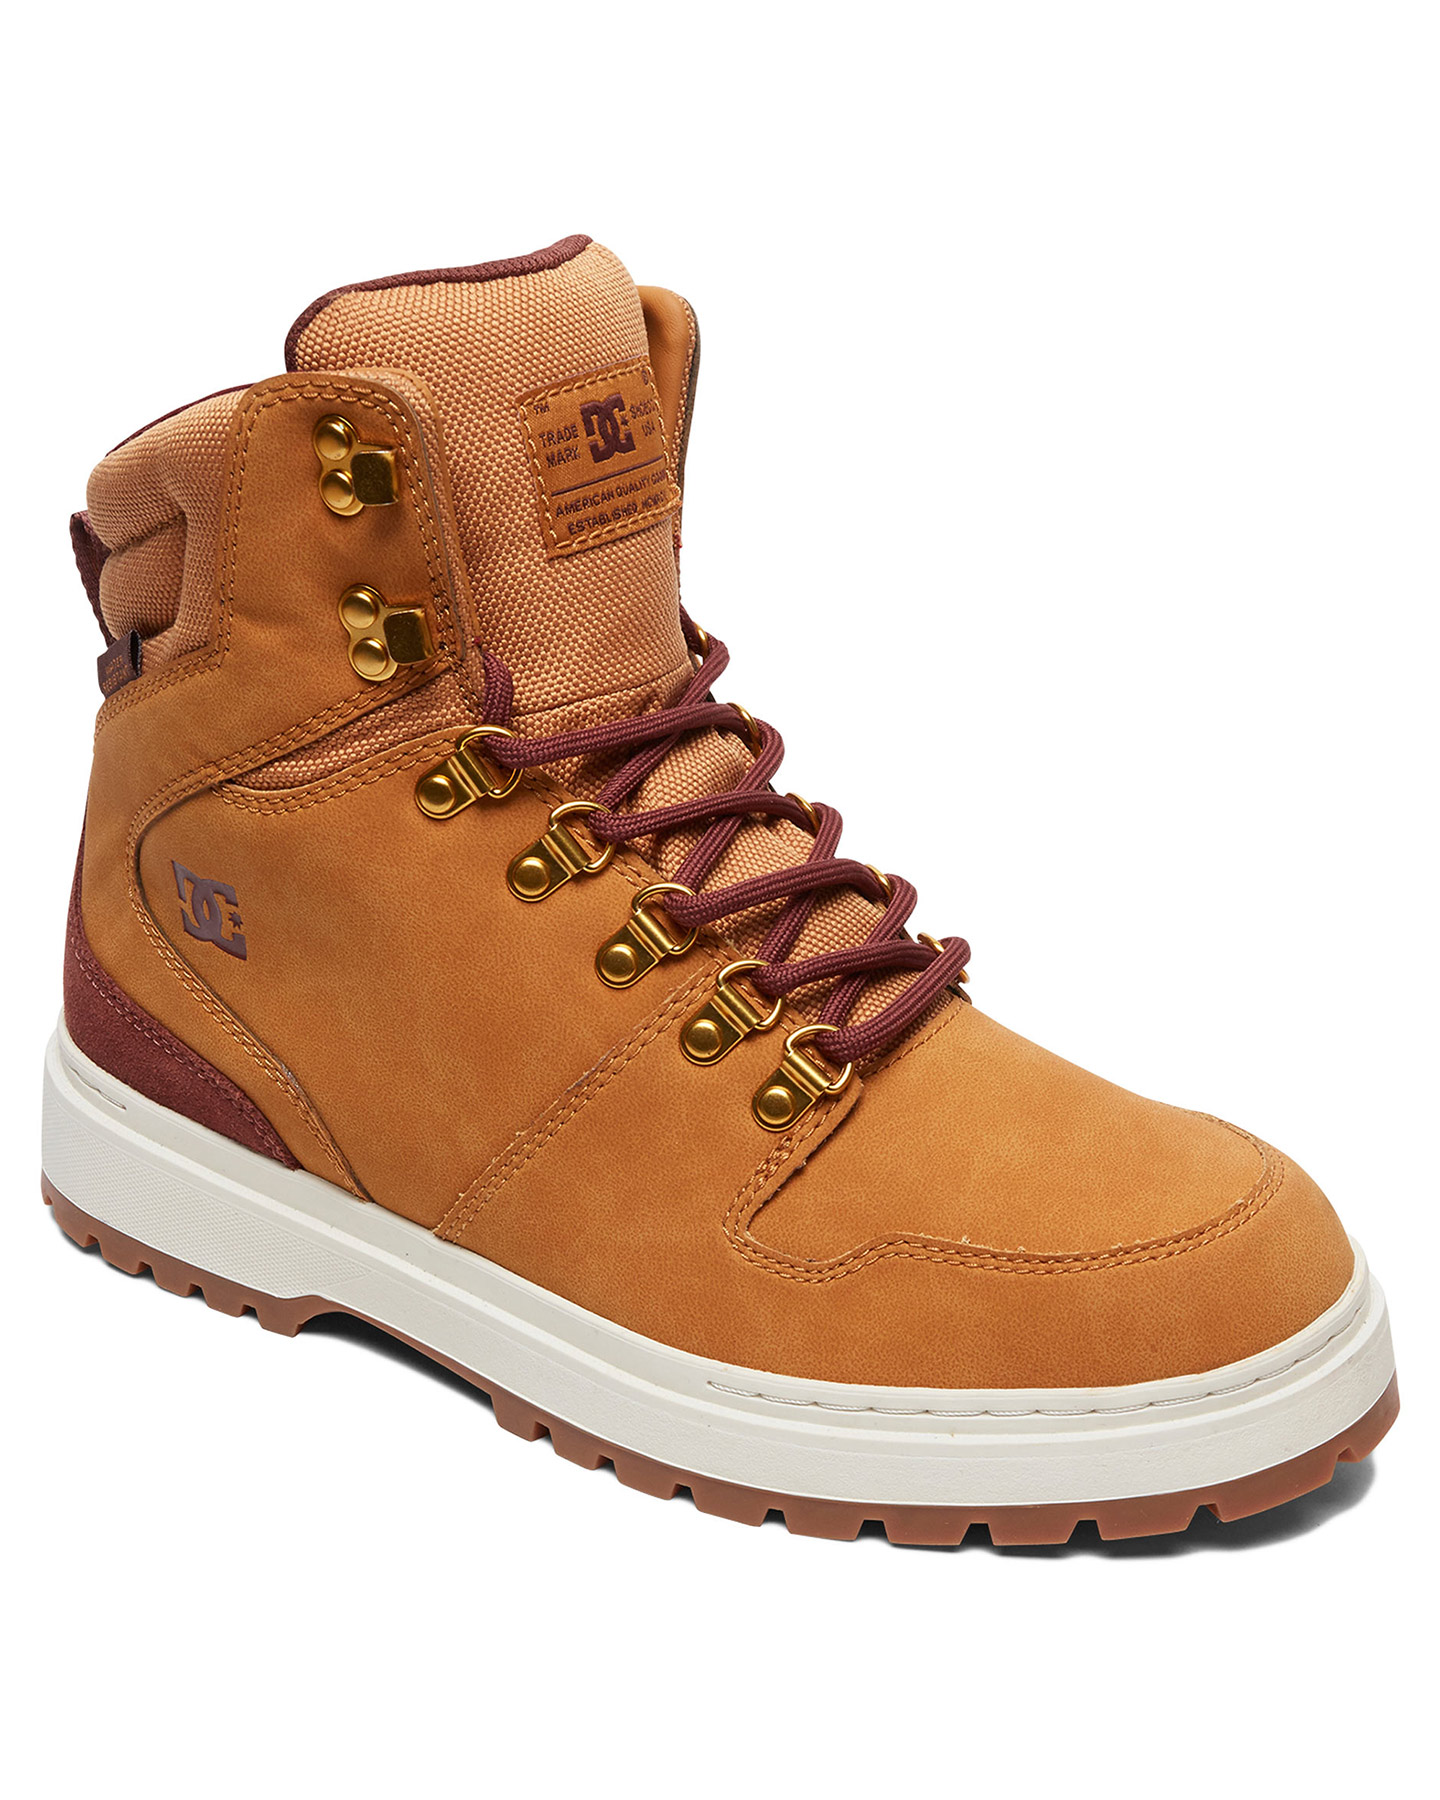 Dc Shoes Mens Peary Winter Boots - Wheat | SurfStitch